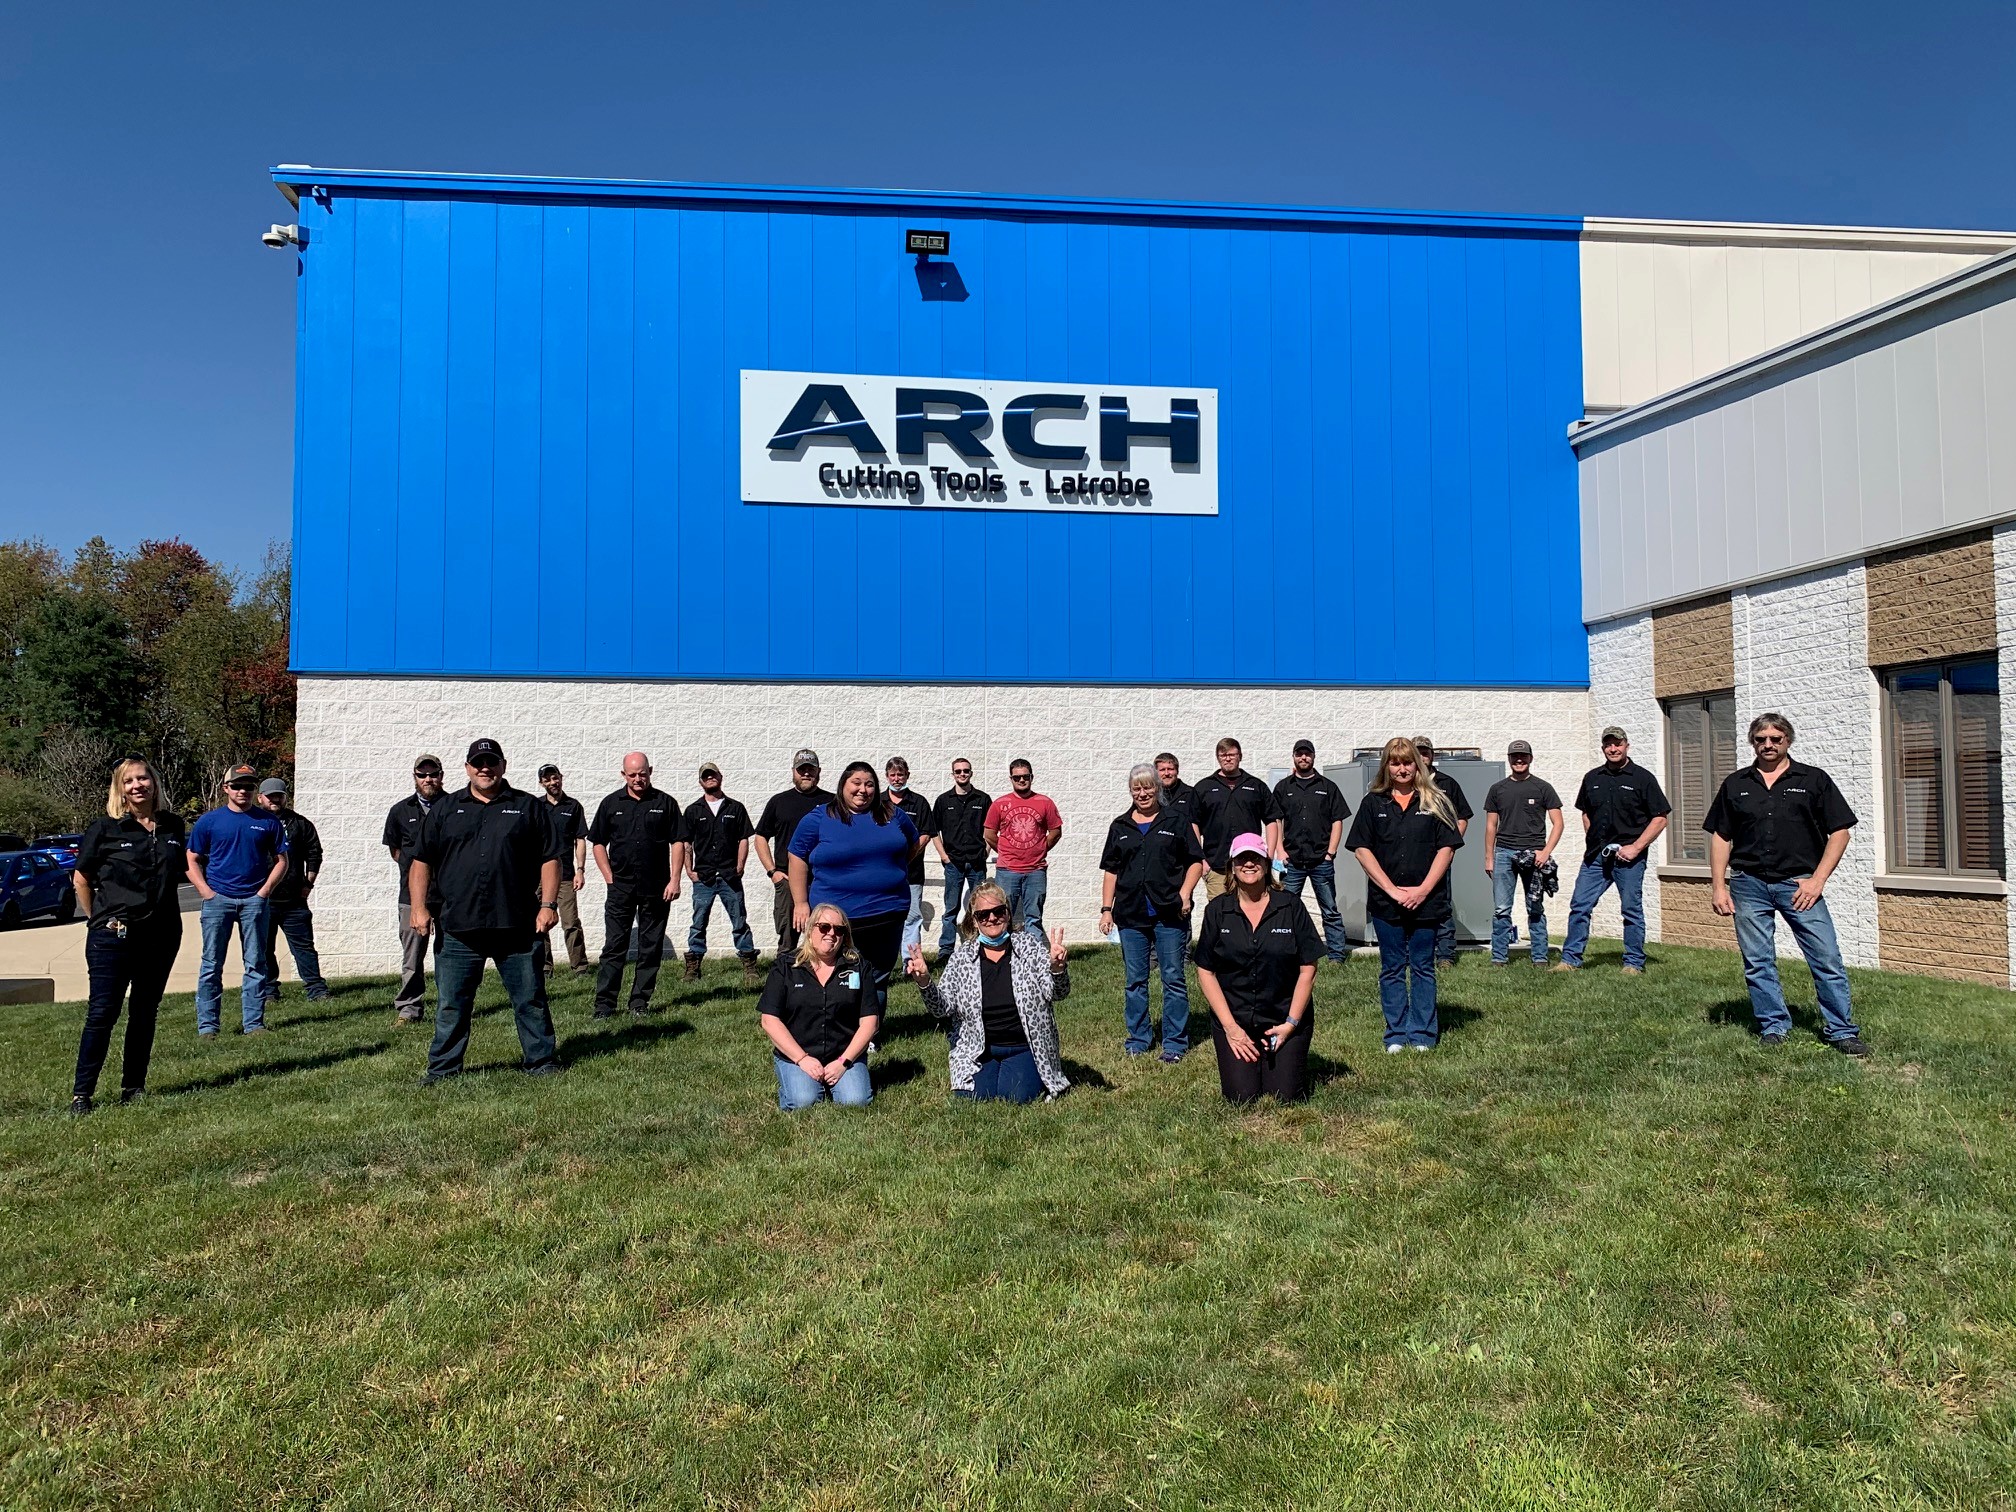 The ARCH Cutting Tools team